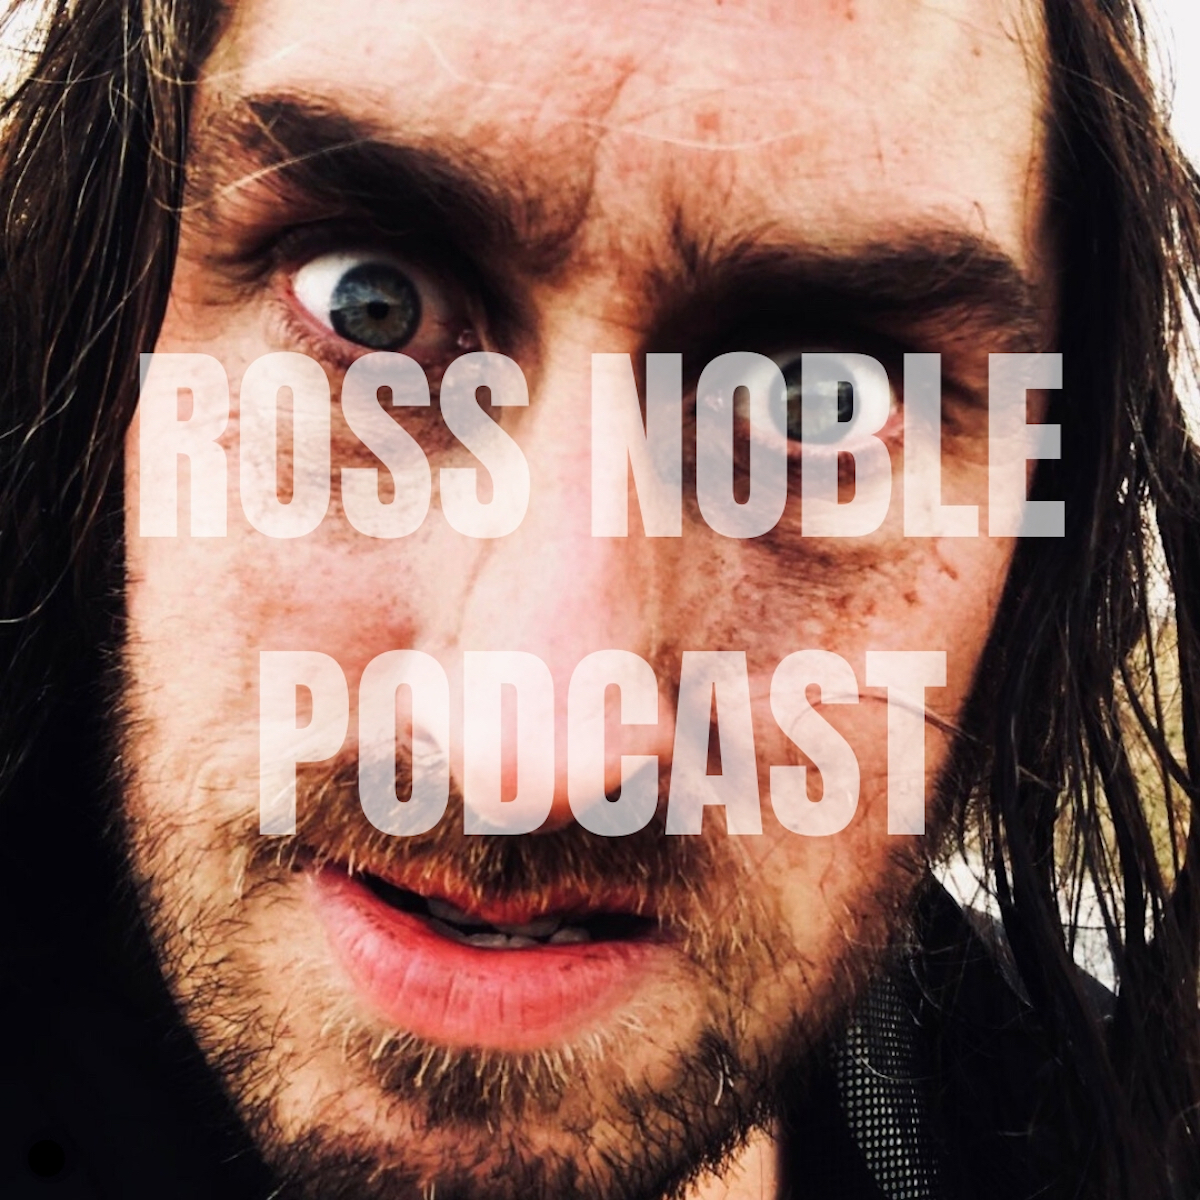 ROSS NOBLE PODCAST: Shania Twain, That Don't Impress Me Much - The Prequels